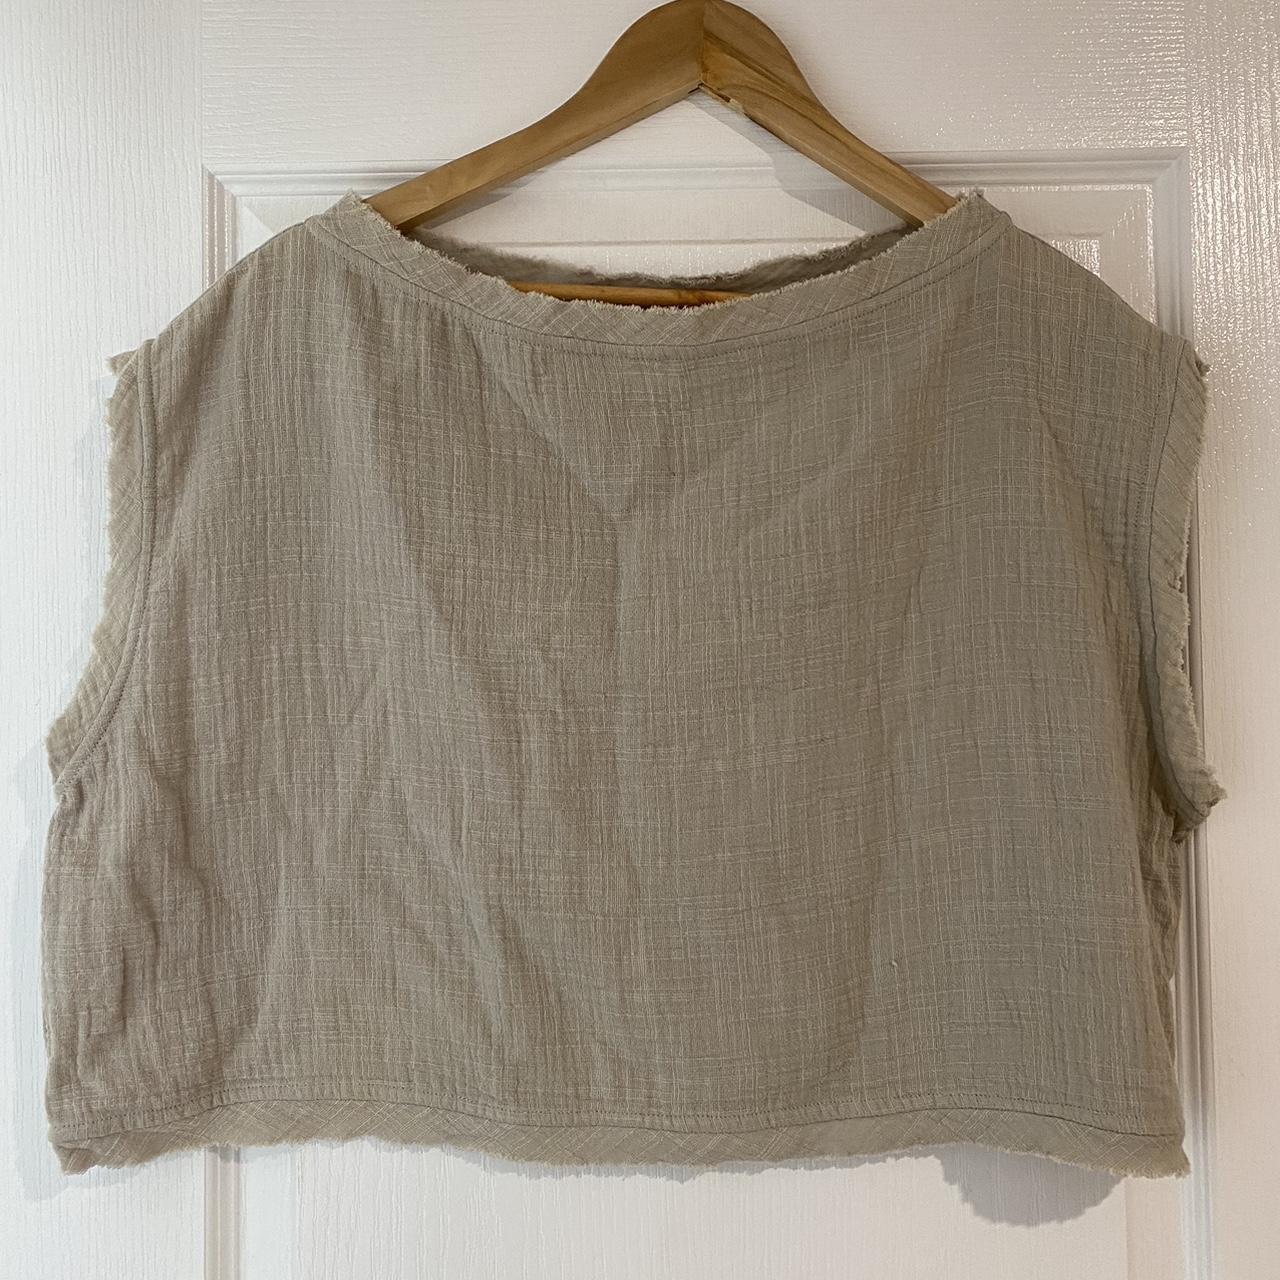 Maurie & Eve smock style top Size 10 Brand new - no... - Depop